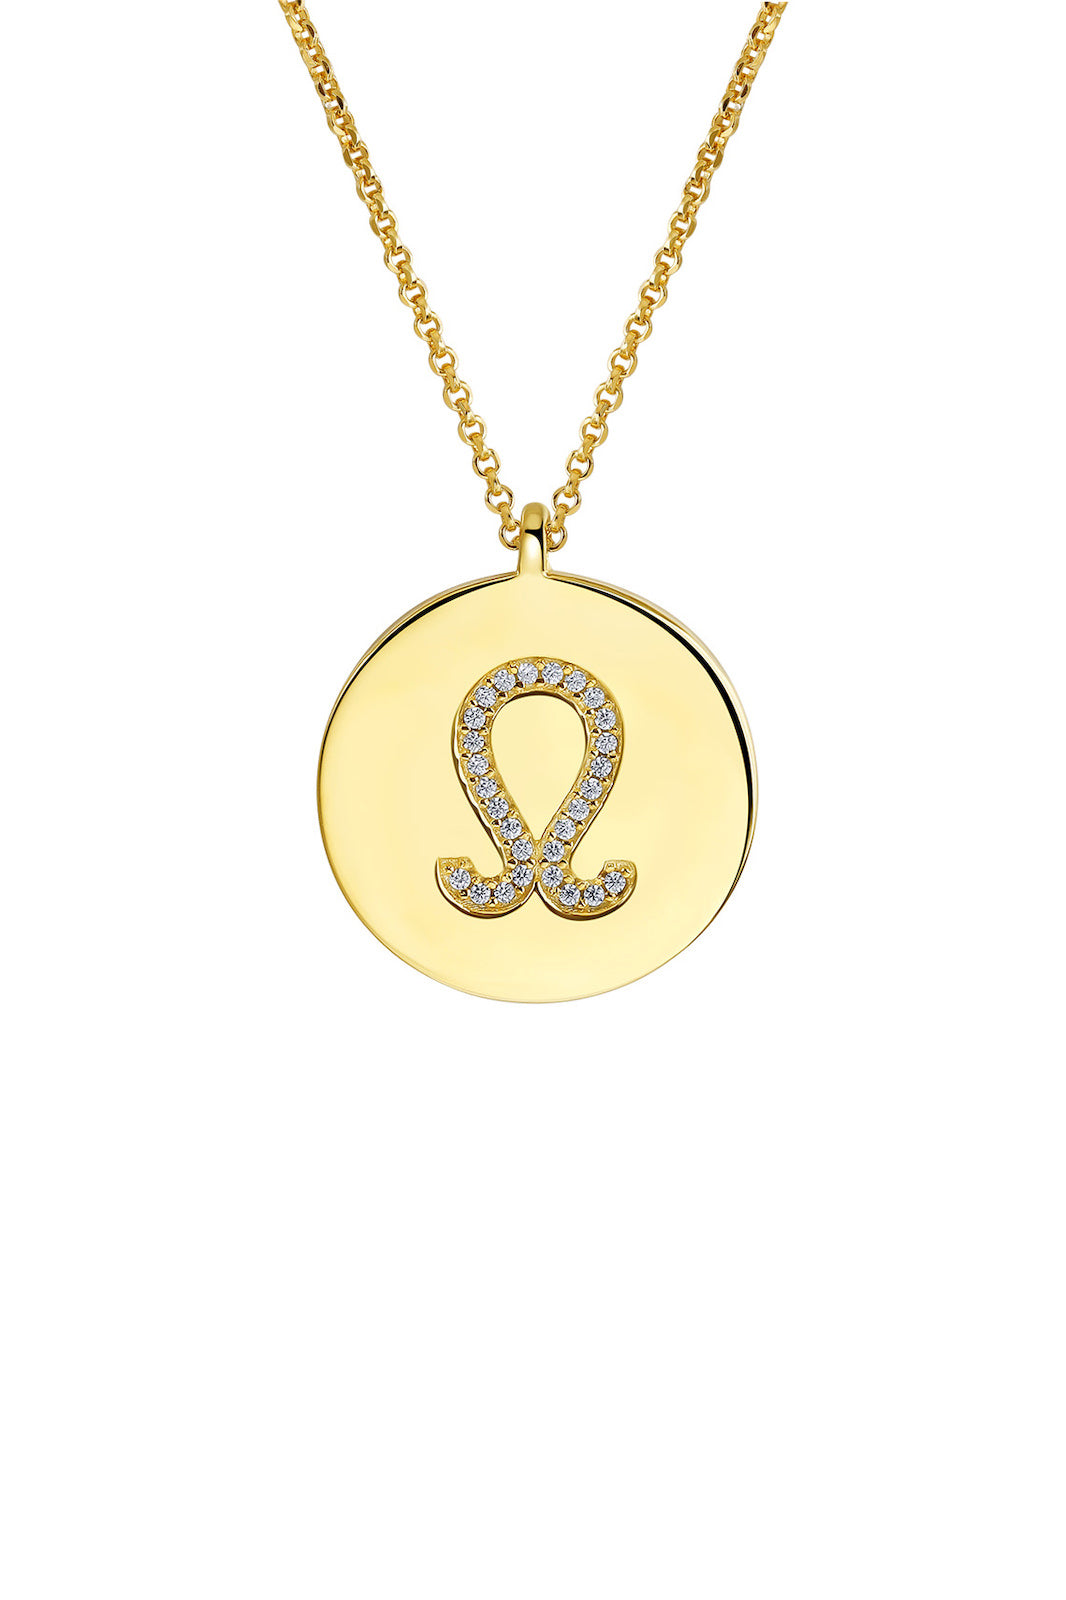 Gold Plated Silver Zodiac Necklace - Leo Side View